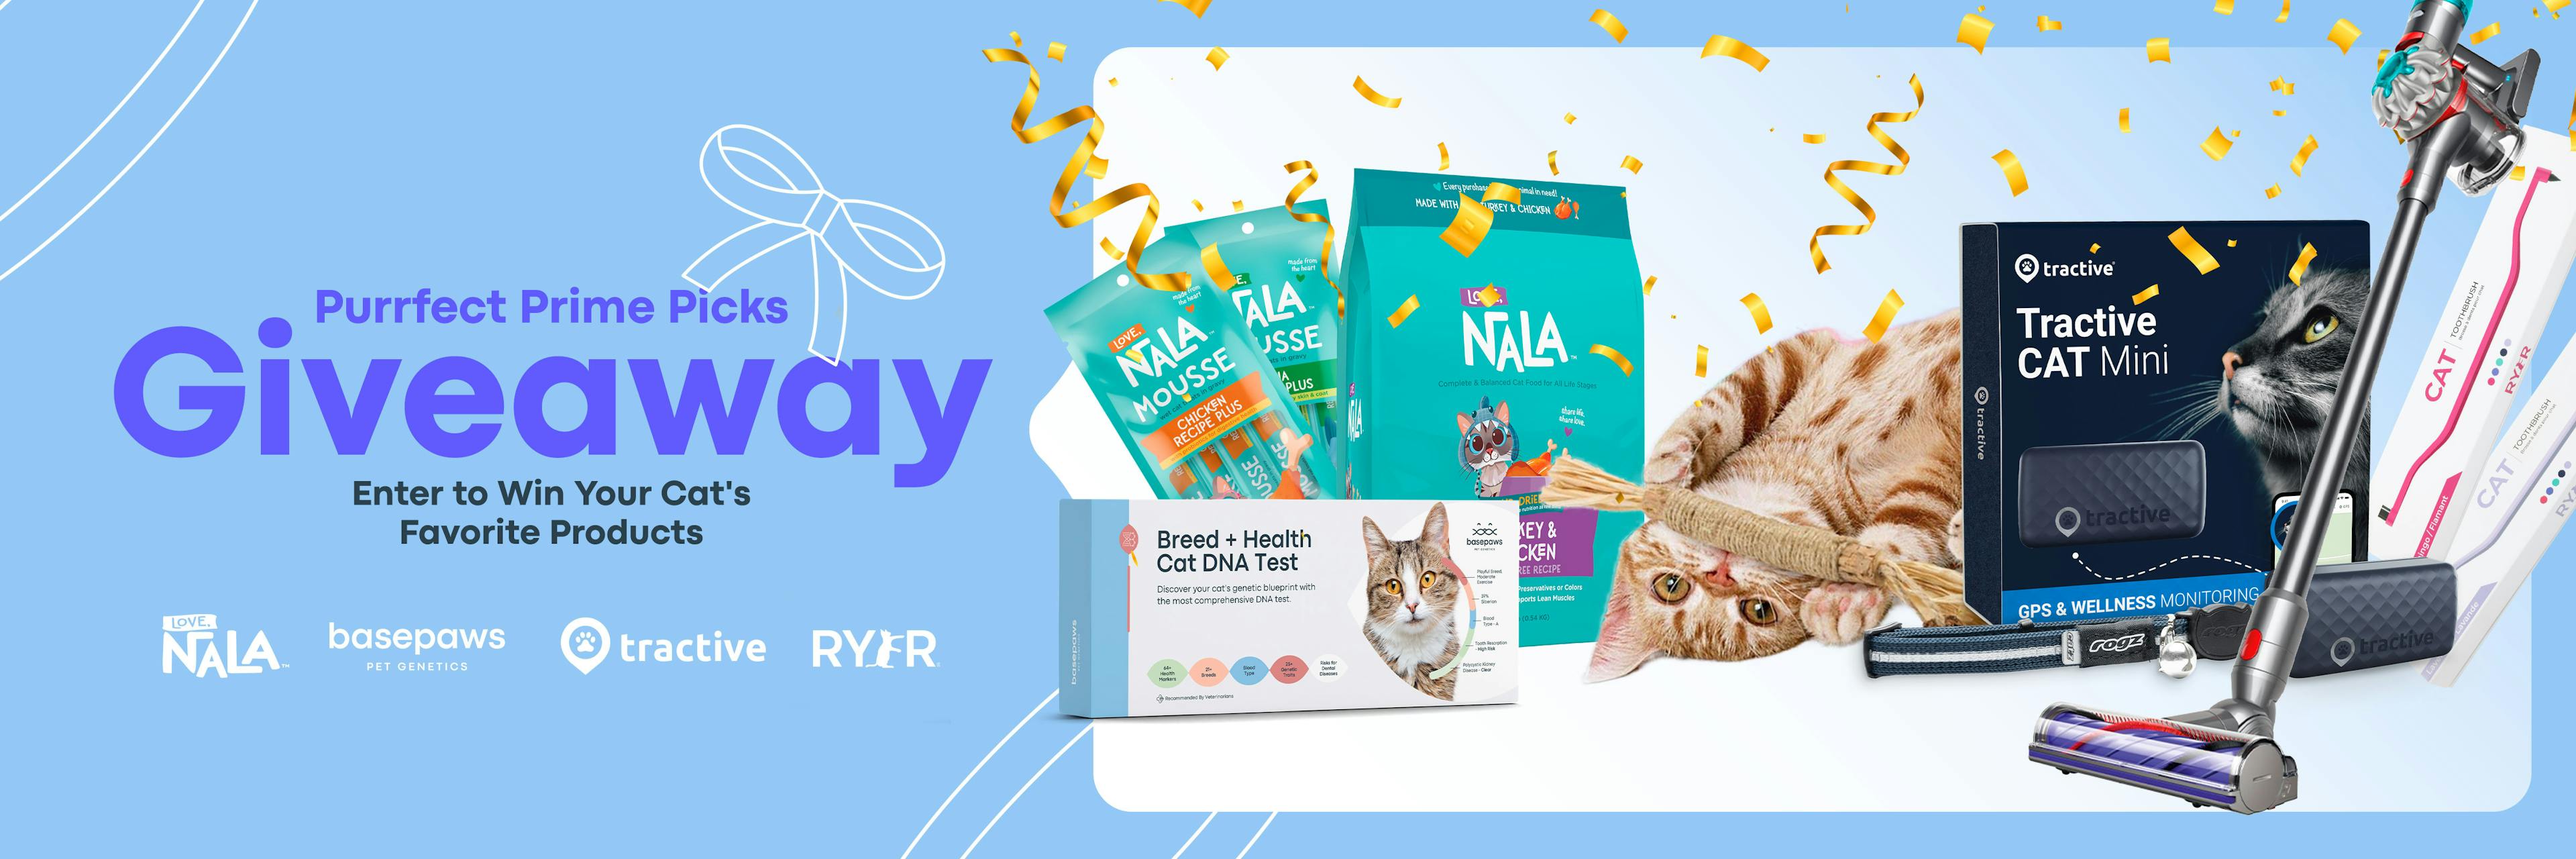 A Purrfect Prime Day Giveaway!